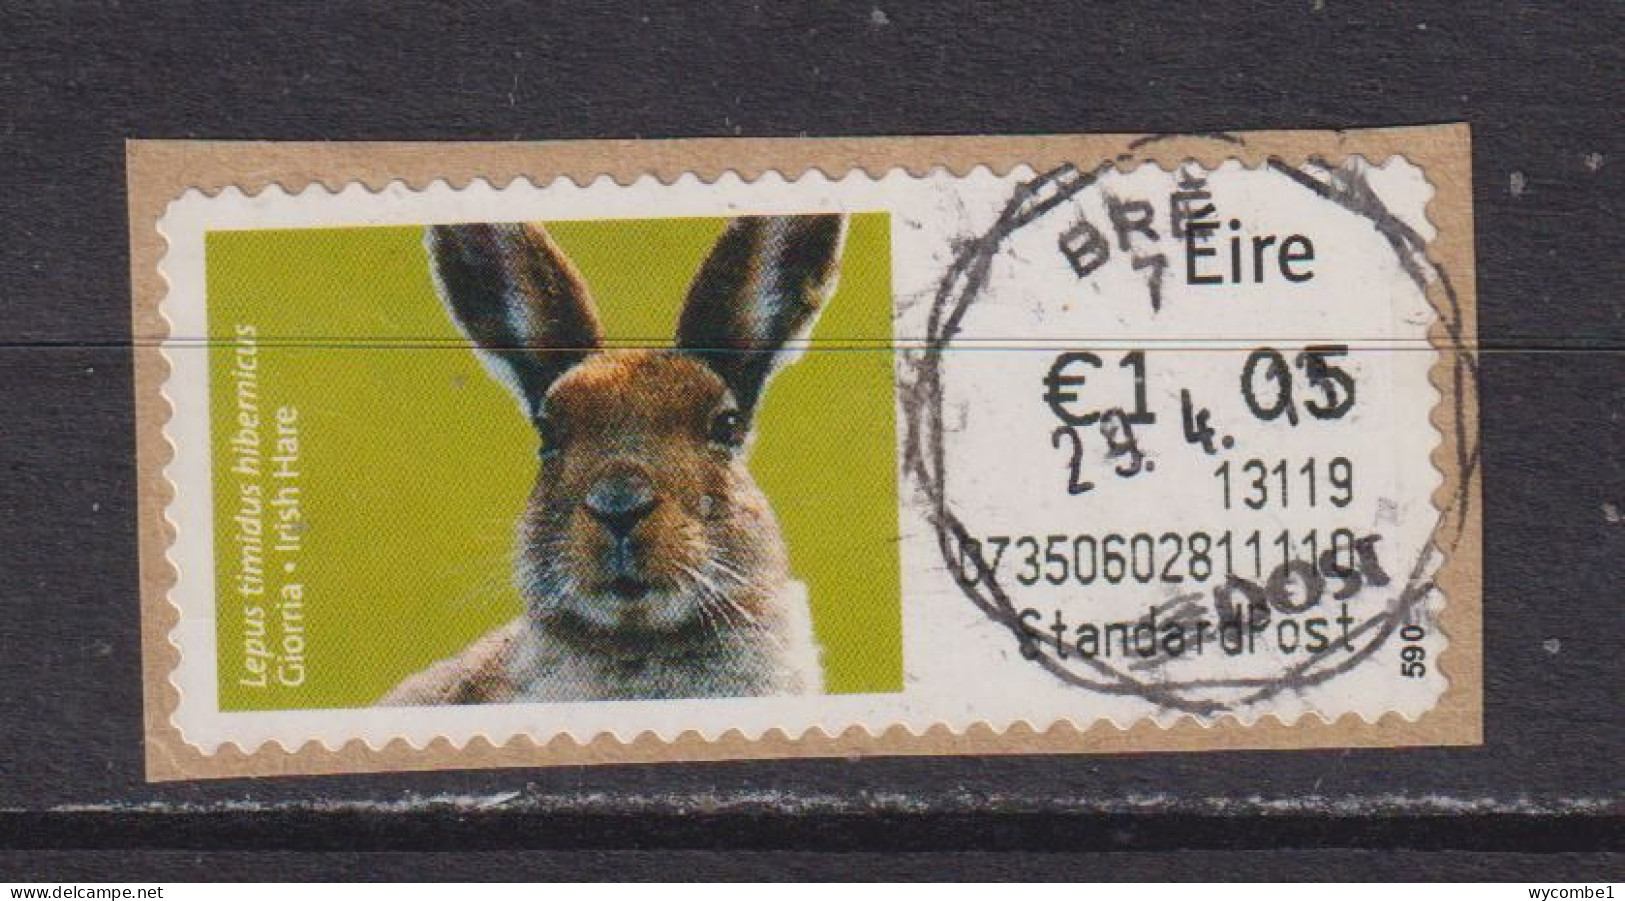 IRELAND  -  2012 Irish Hare SOAR (Stamp On A Roll)  CDS  Used On Piece As Scan - Used Stamps